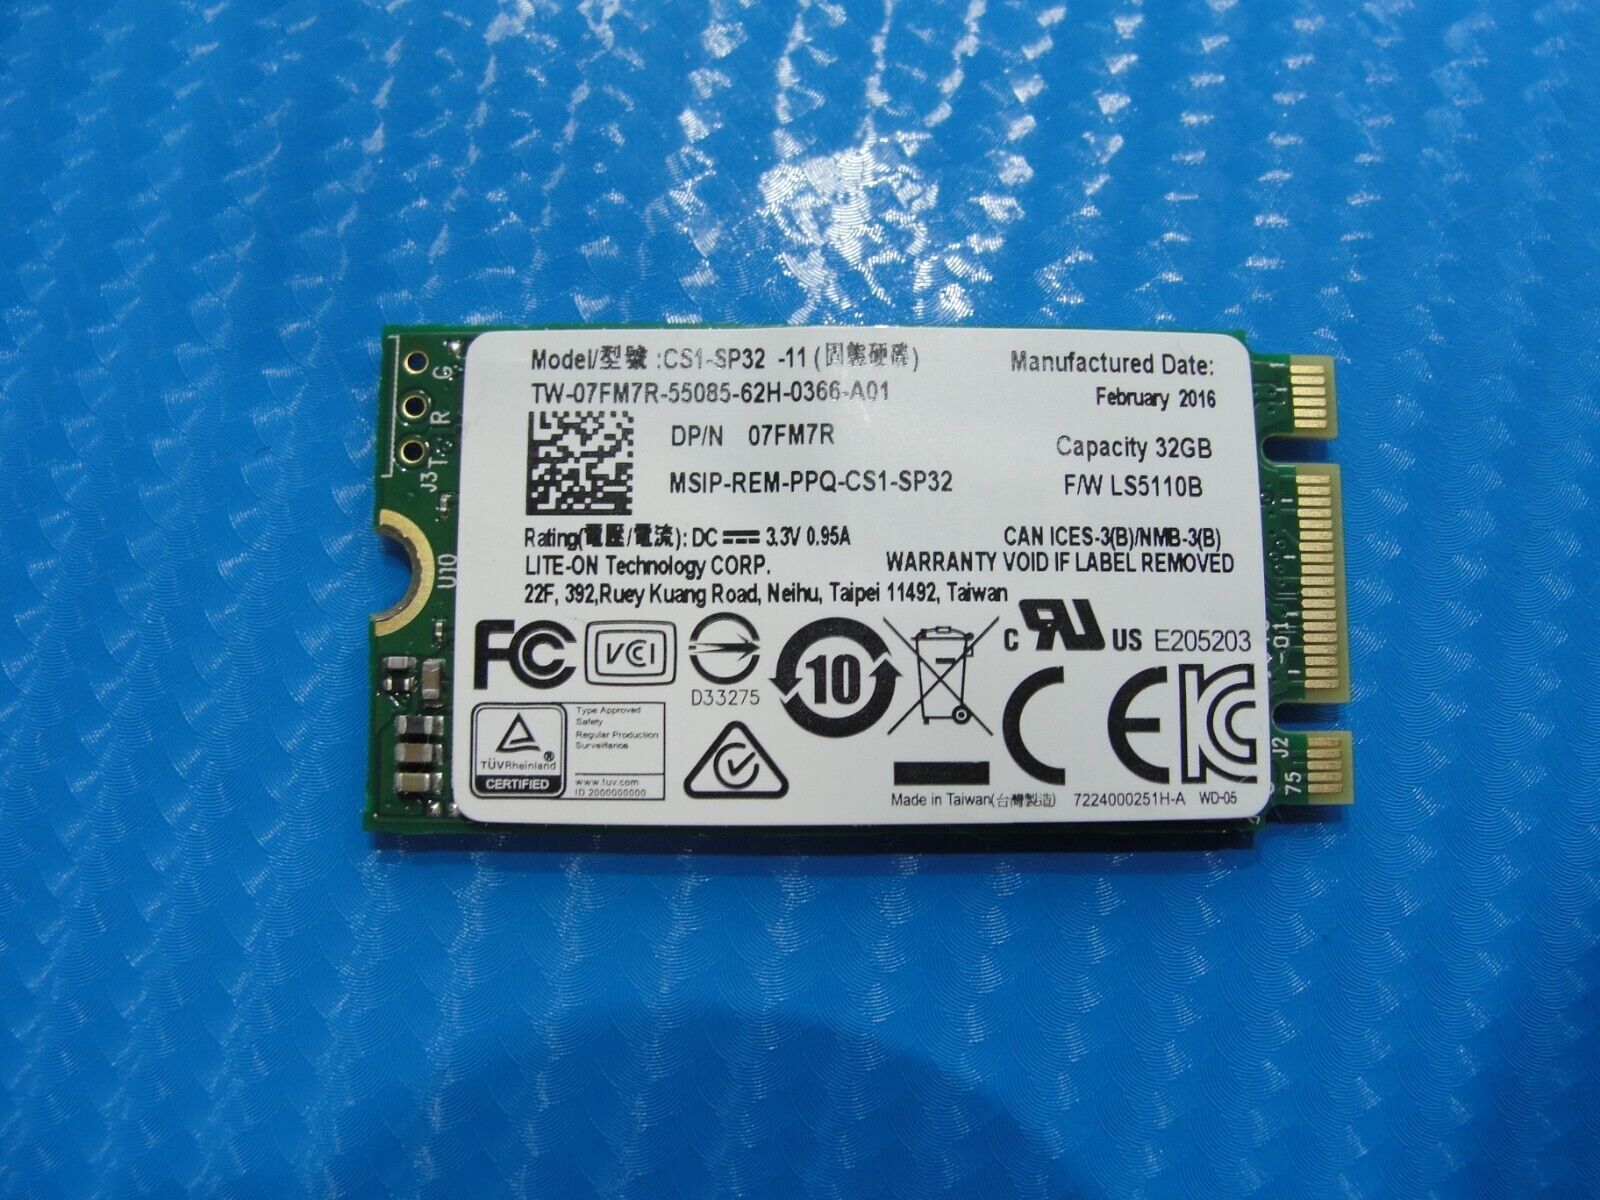 Dell Inspiron 7459 Lite-On 32Gb M.2 SSD Solid State Drive CS1-SP32-11 7FM7R